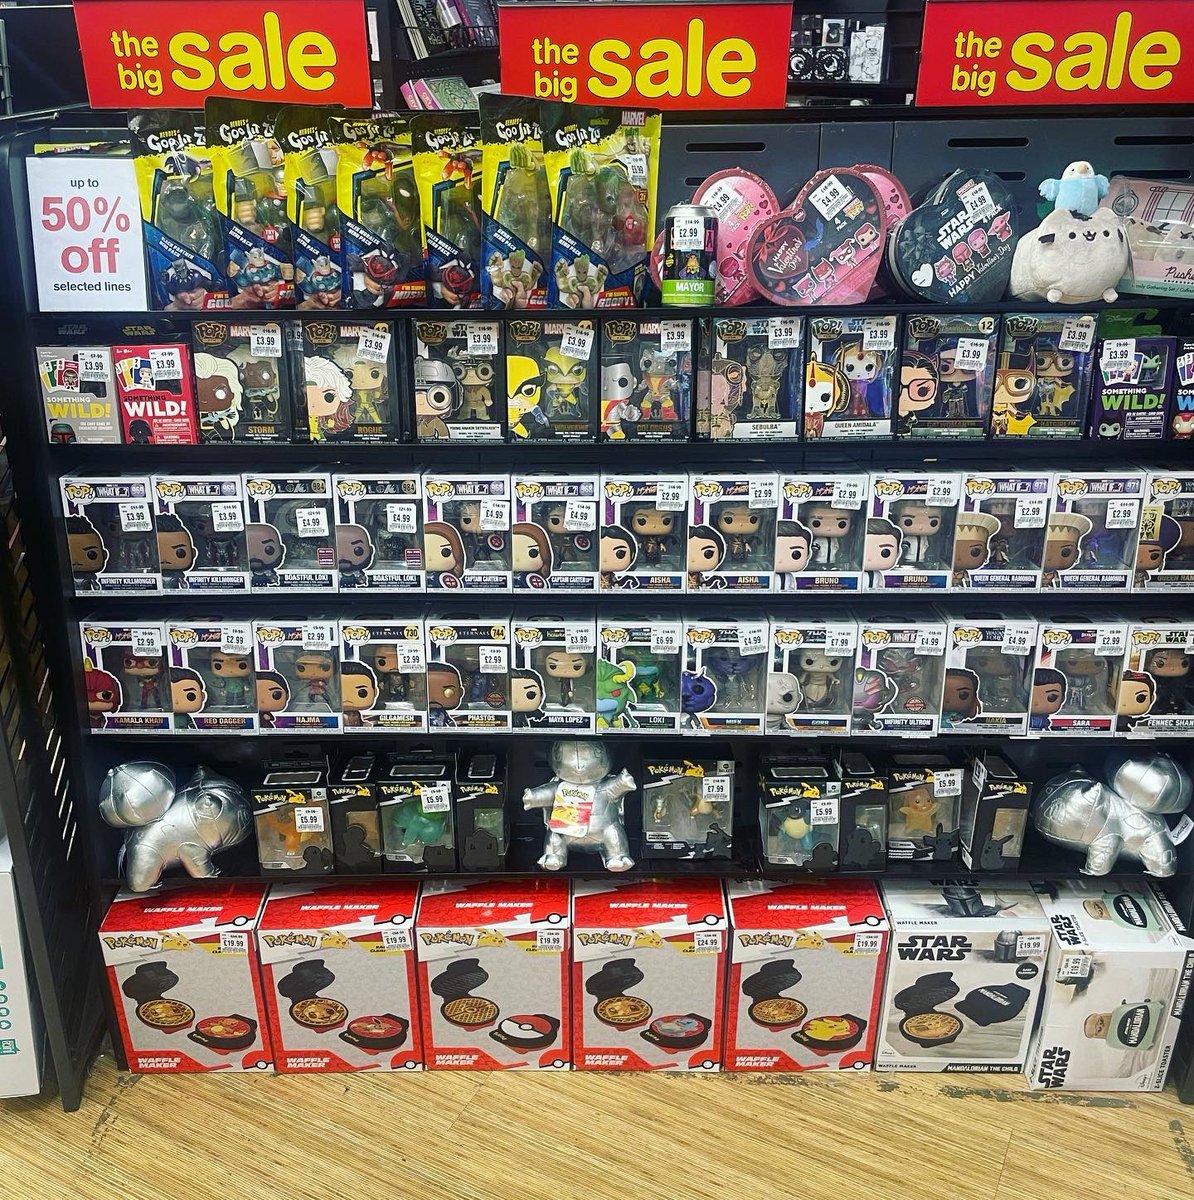 BIG SALE! Prices reduced big time! Come and take a look! ❤️ #hmv #hmvluton #popculture #funko @hmvtweets